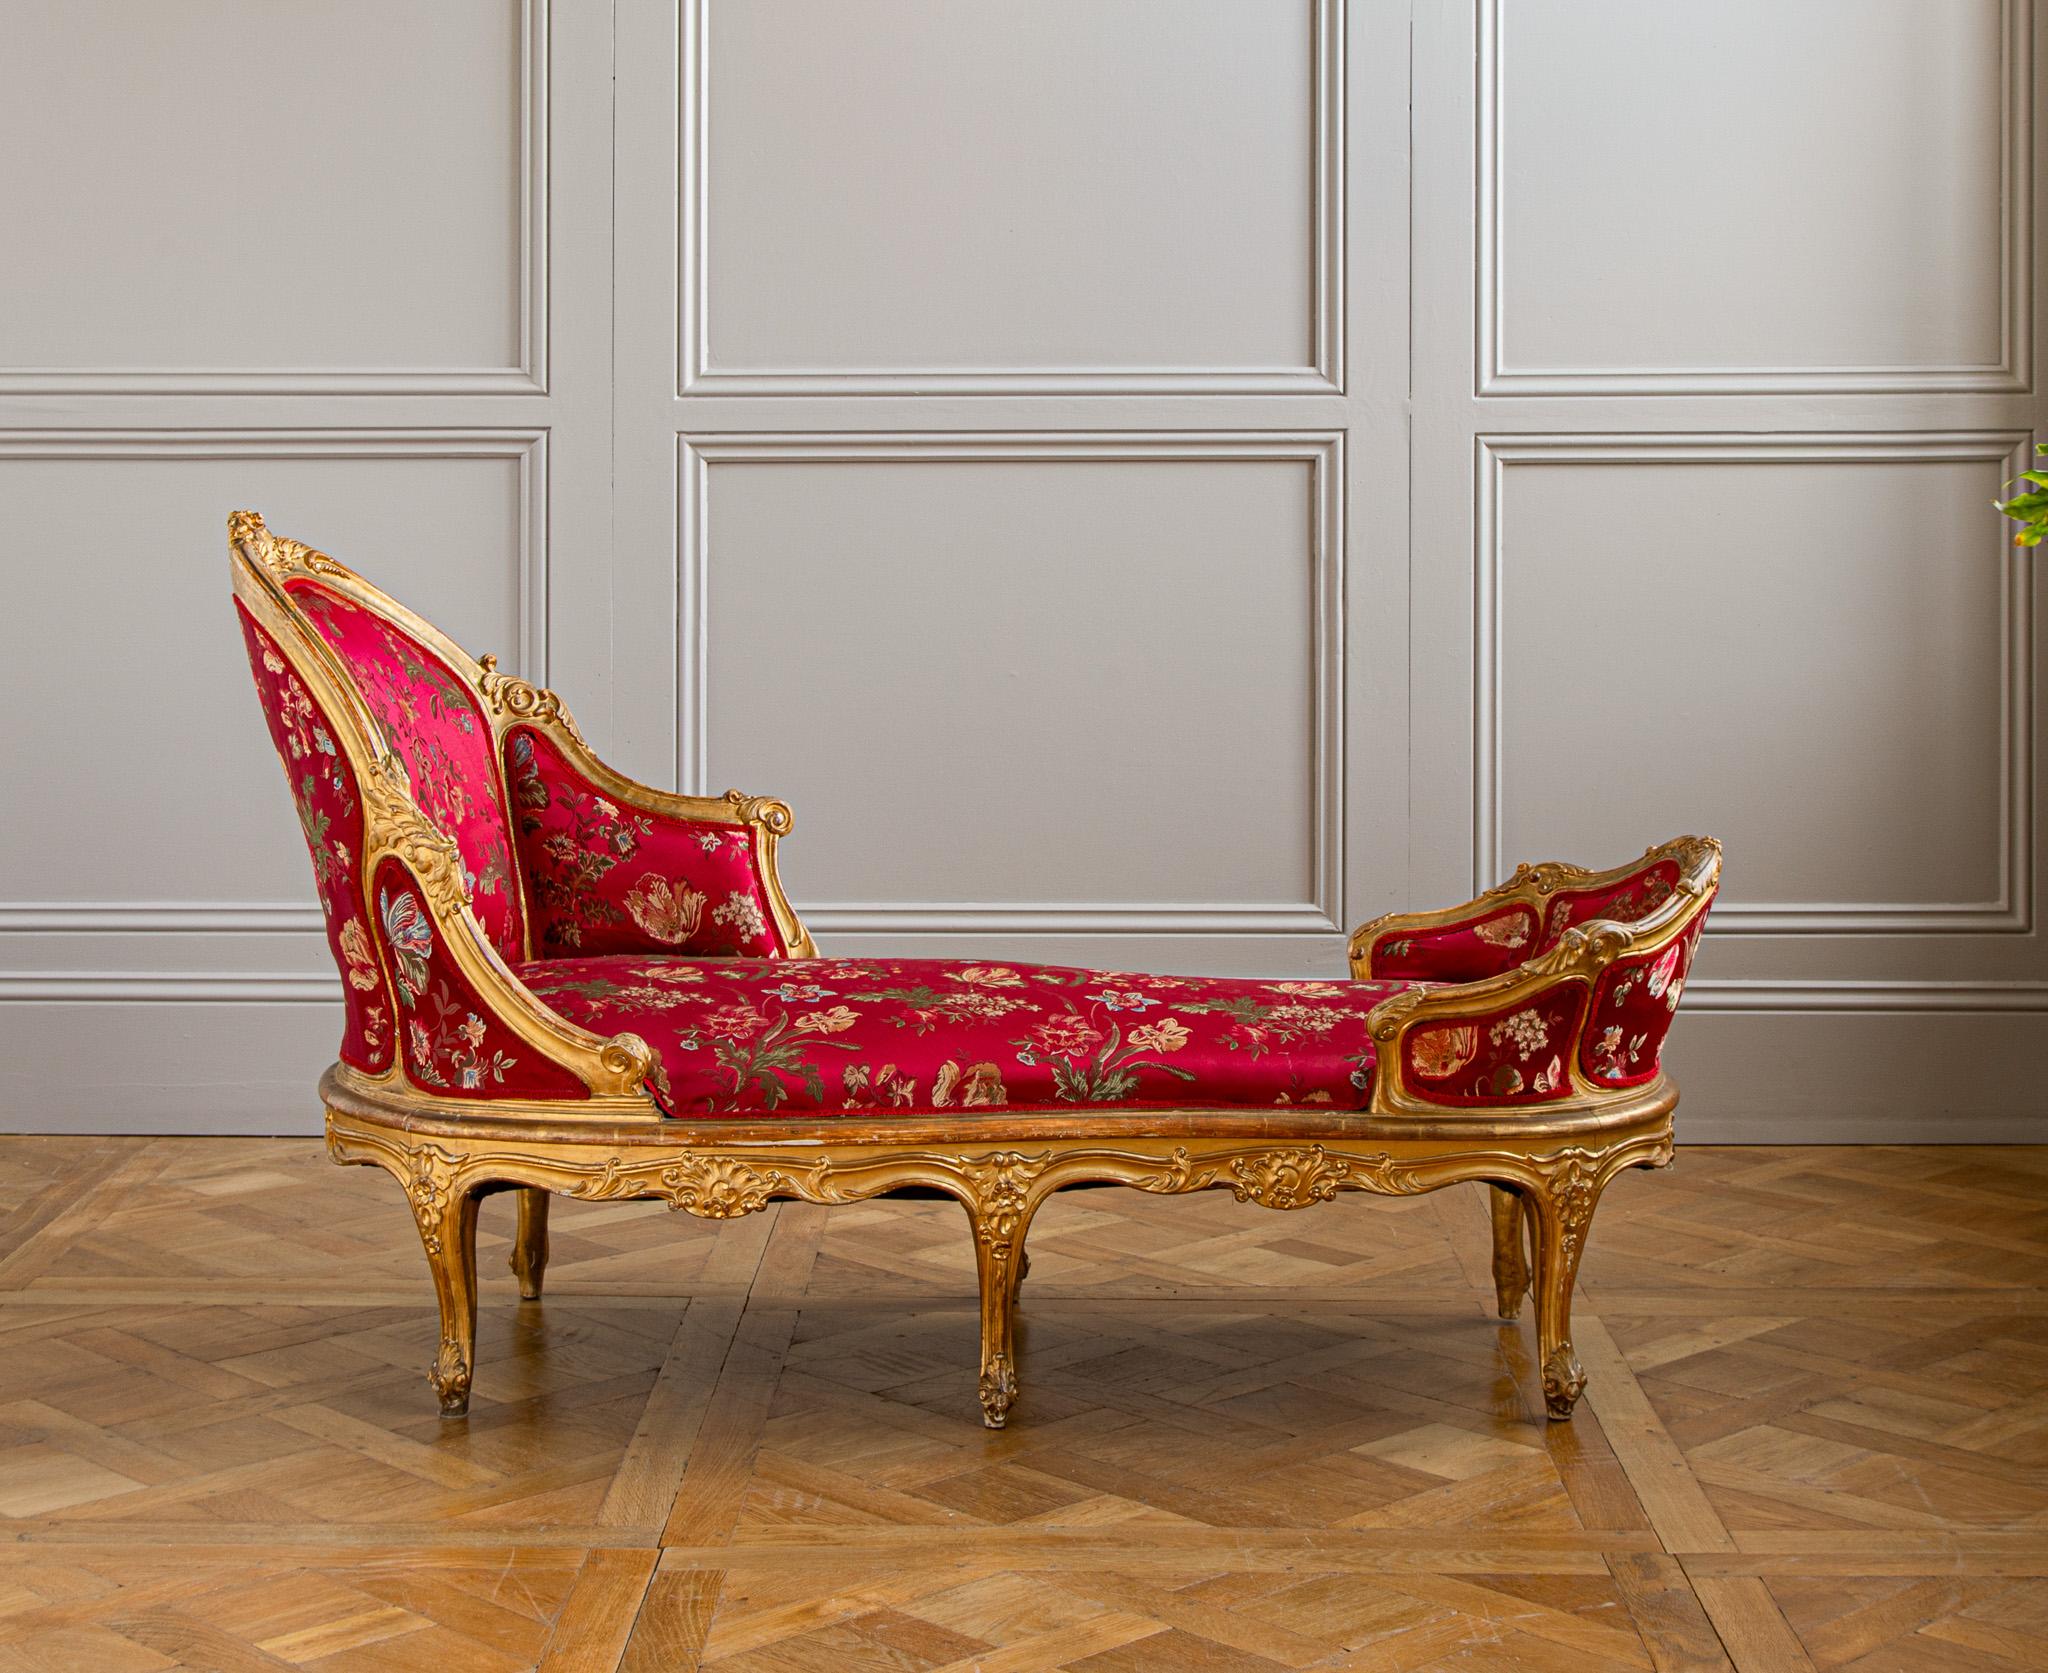 Circa 1880 Italian Giltwood LXV Style Chaise Longue For Sale 4